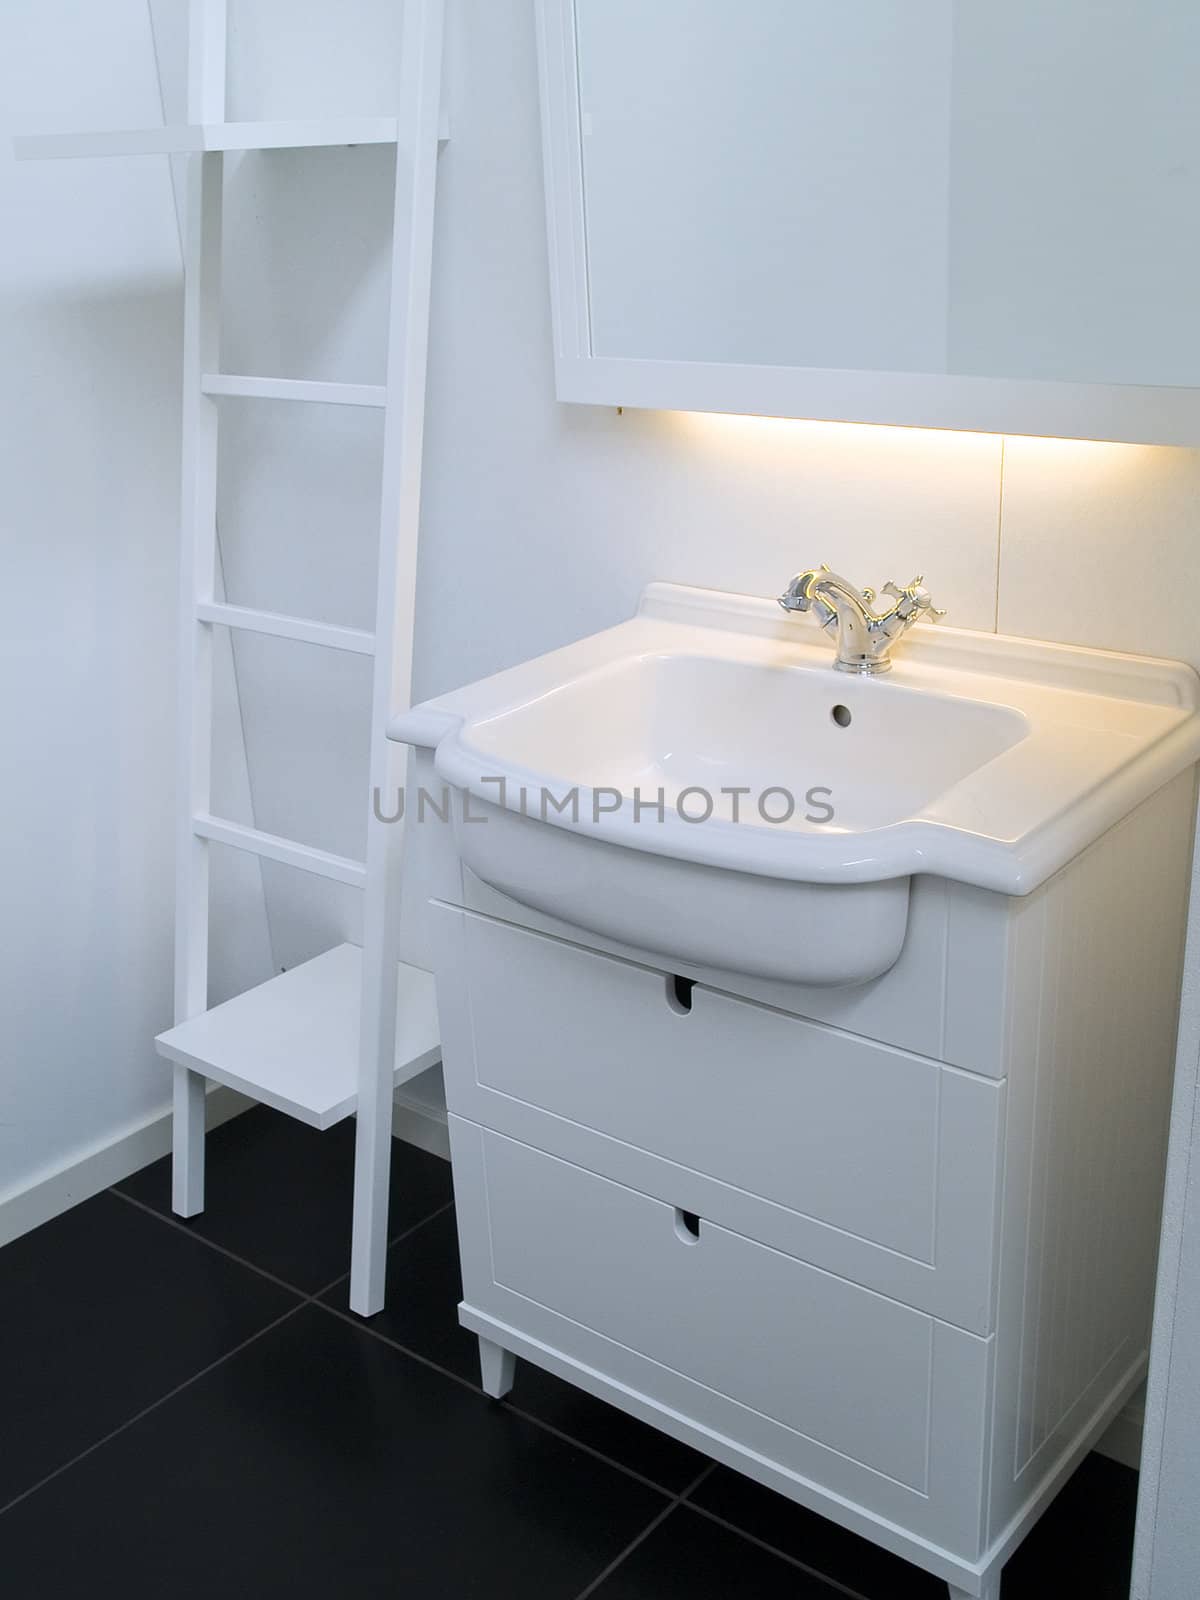 Details of a modern trendy contemporary designer bathroom in all white elements